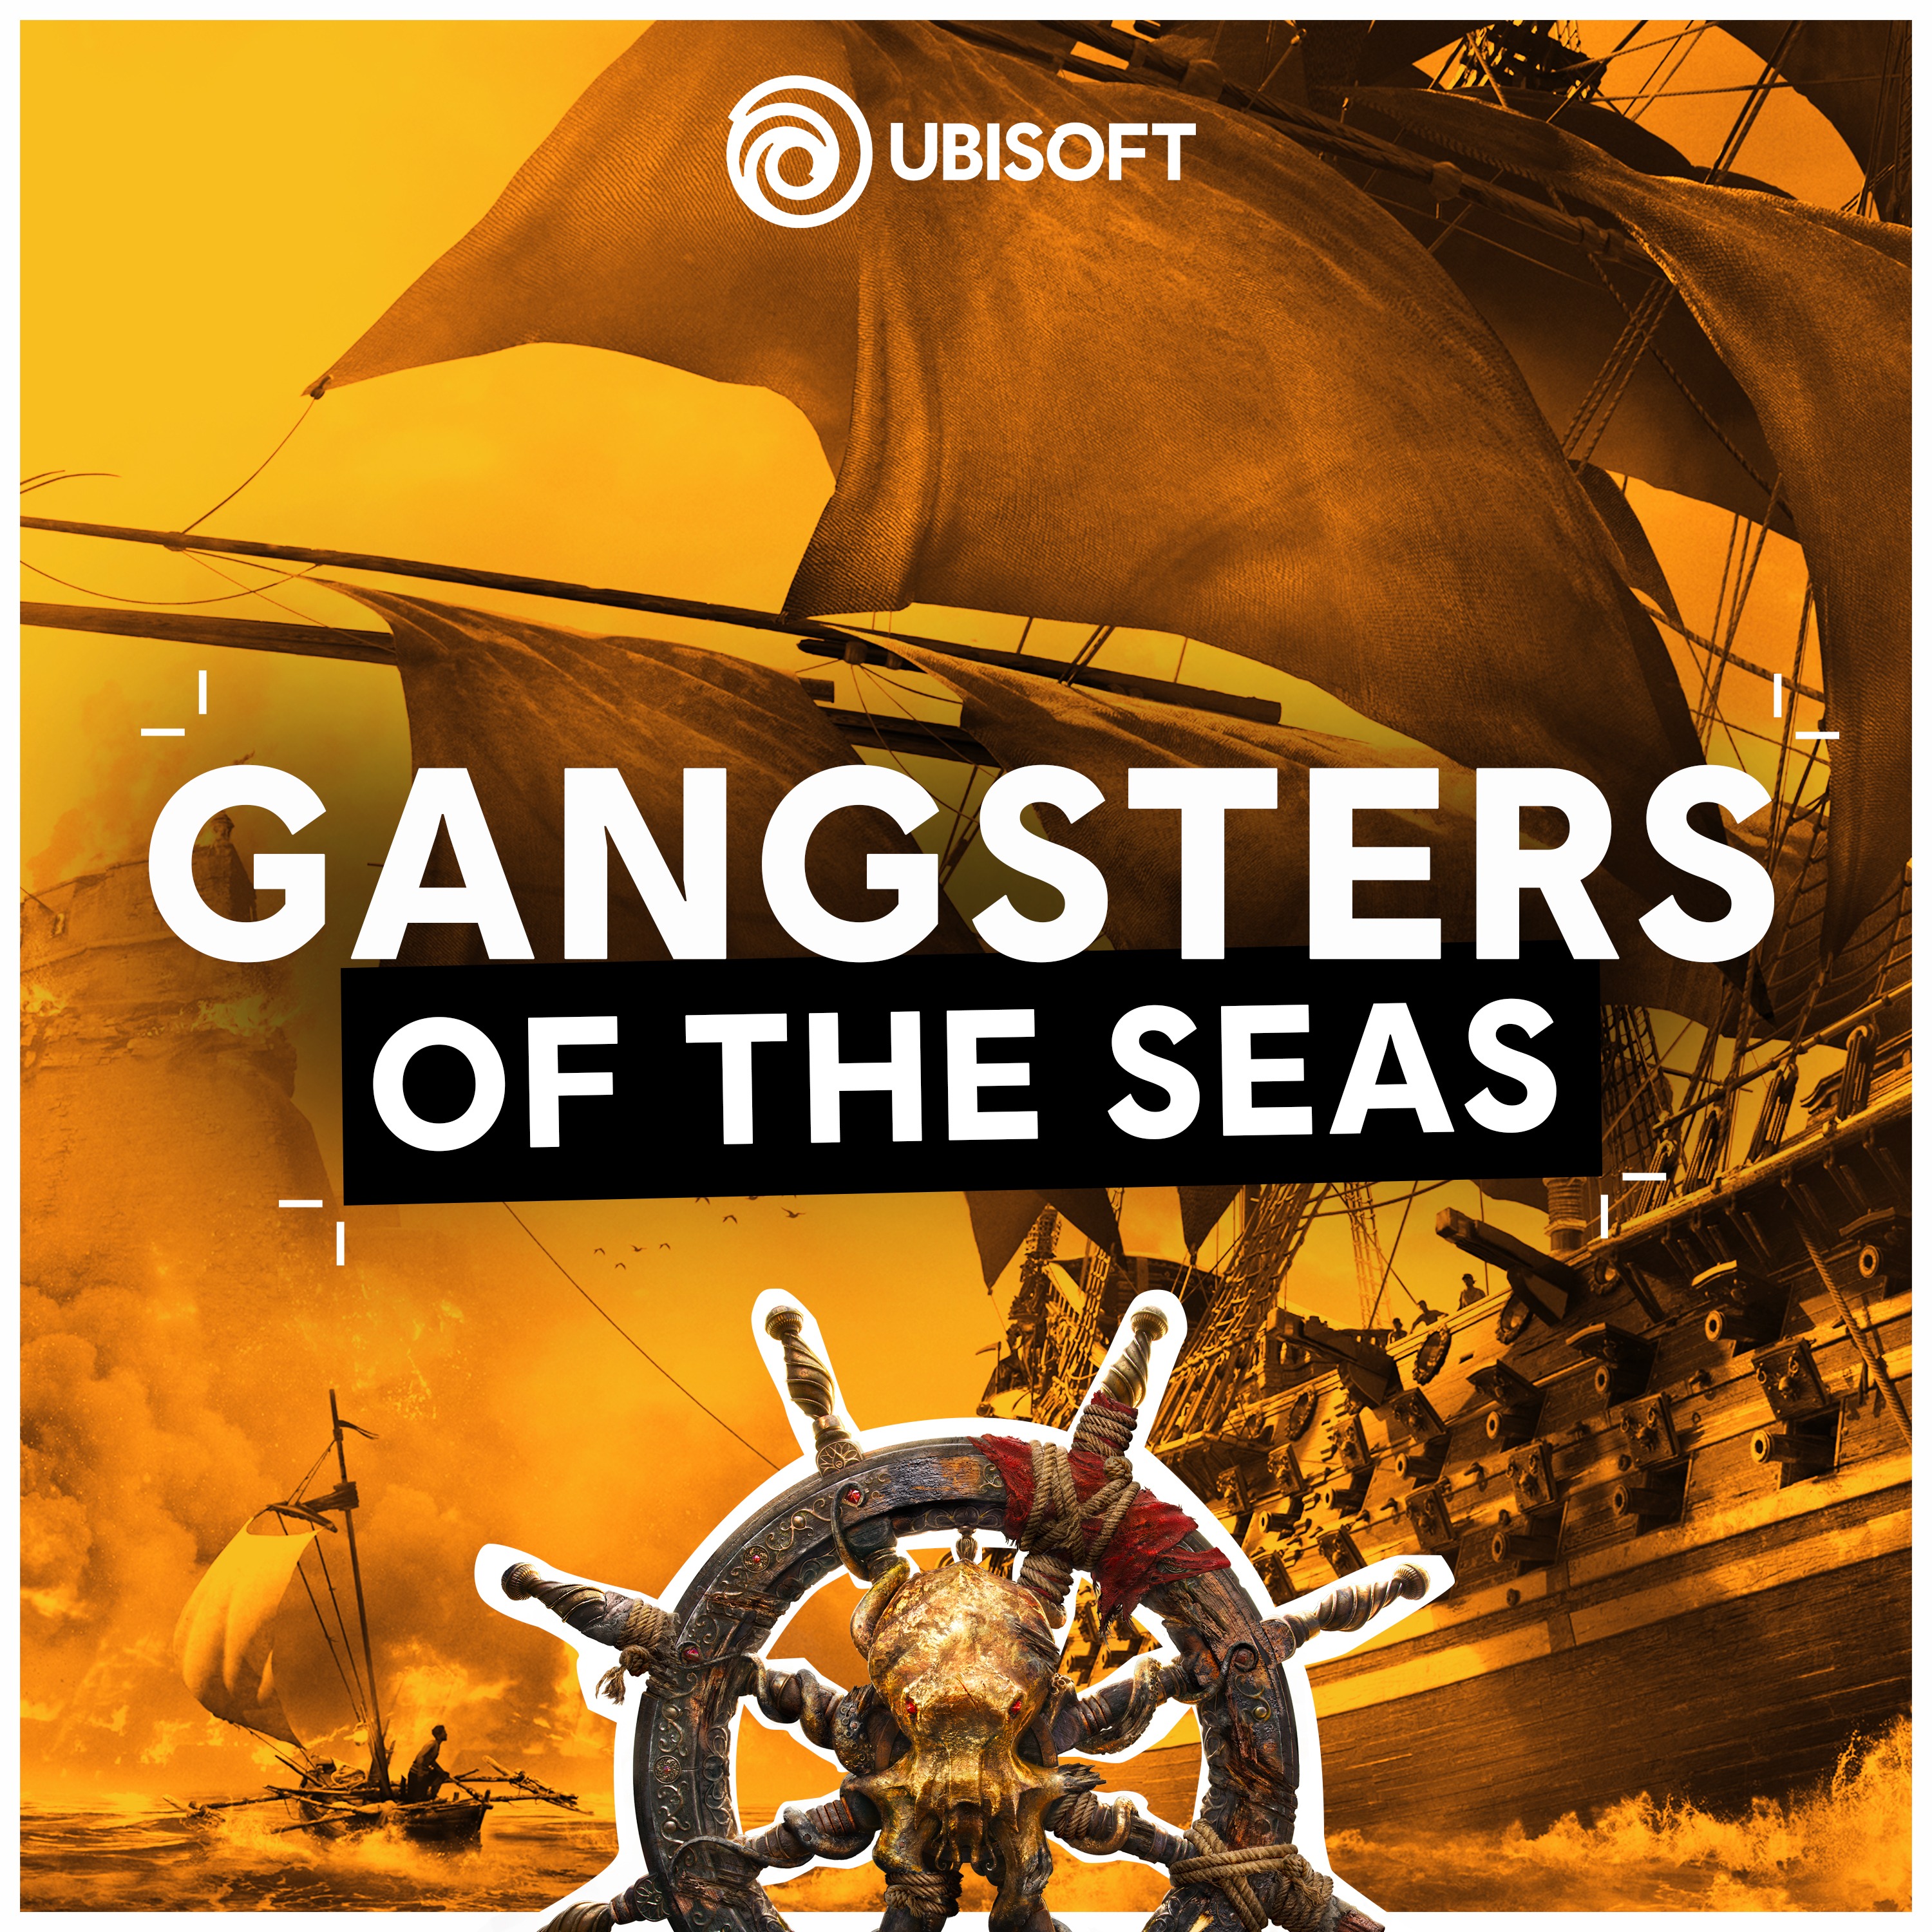 Gangsters of the Seas | EP 5 | Kanhoji Angre, the pirate admiral